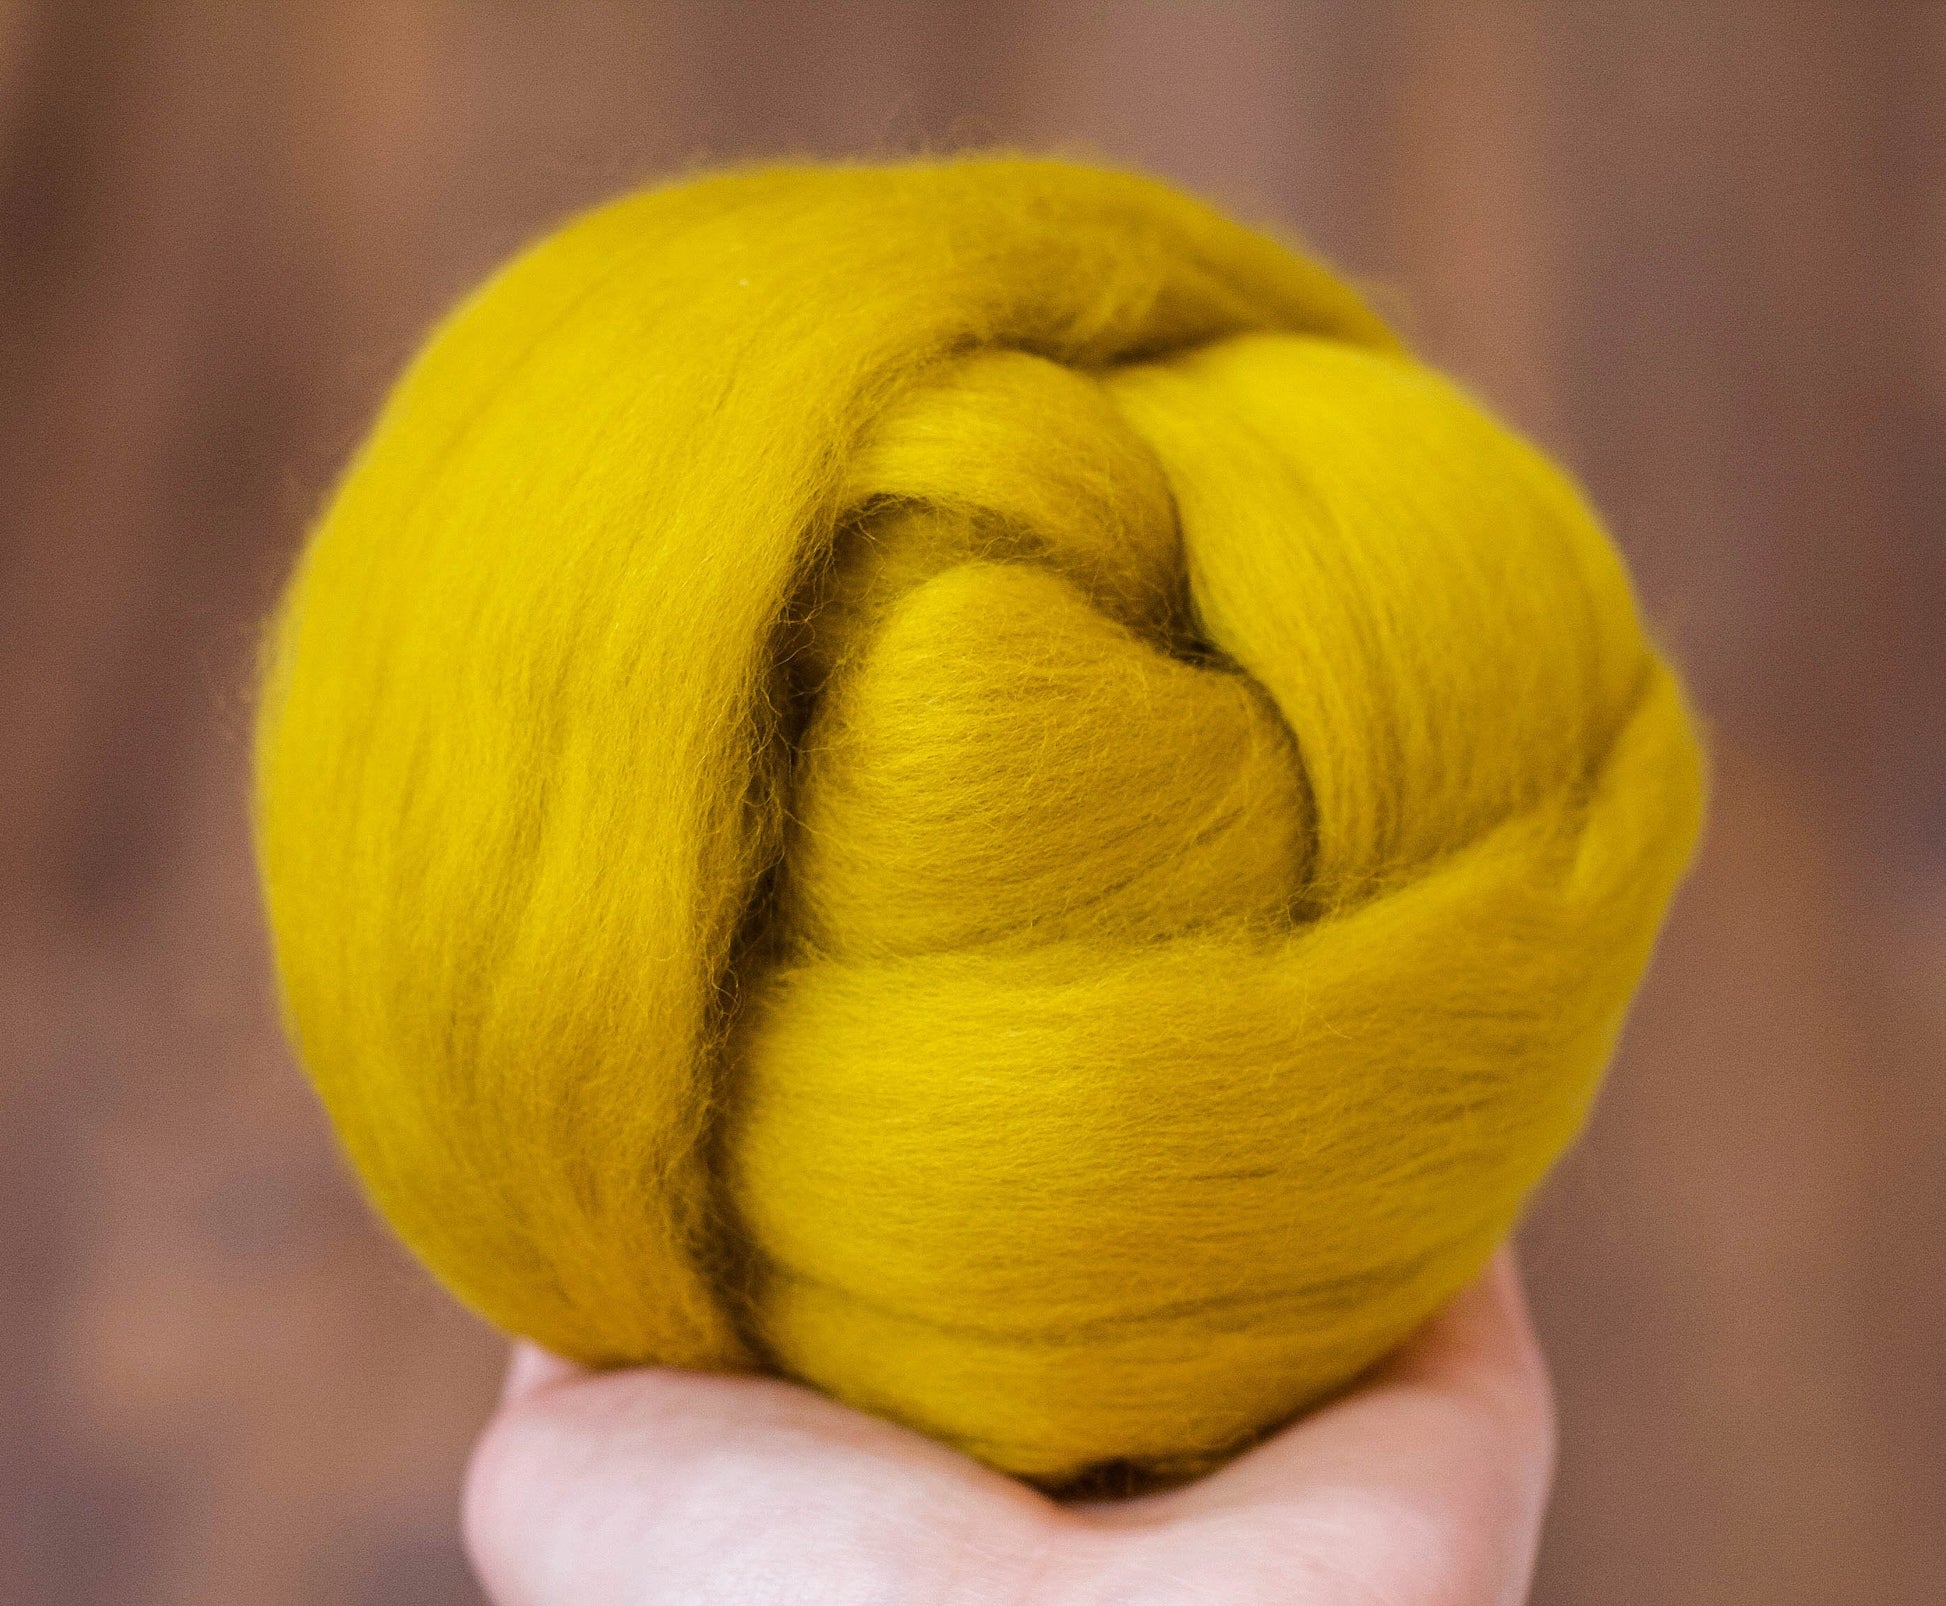 Merino Wool Roving for Felting and Spinning - The Yellows